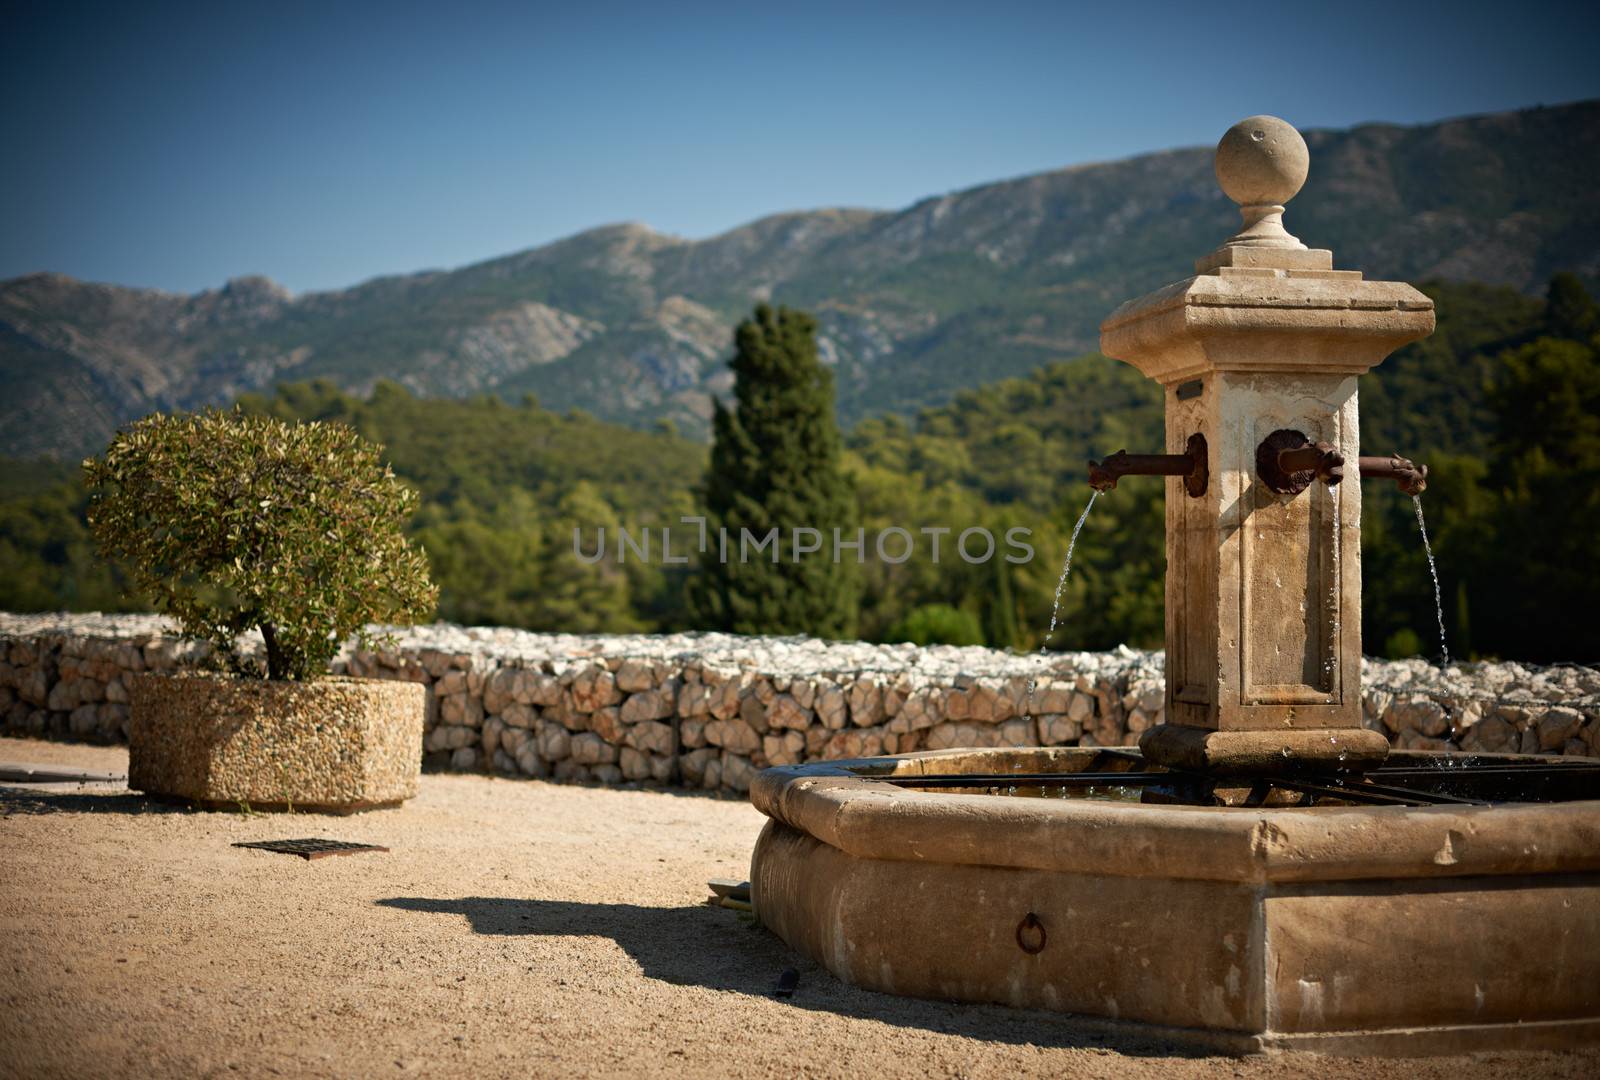 Old fountain in the village of Vauvenargues, French Provnece